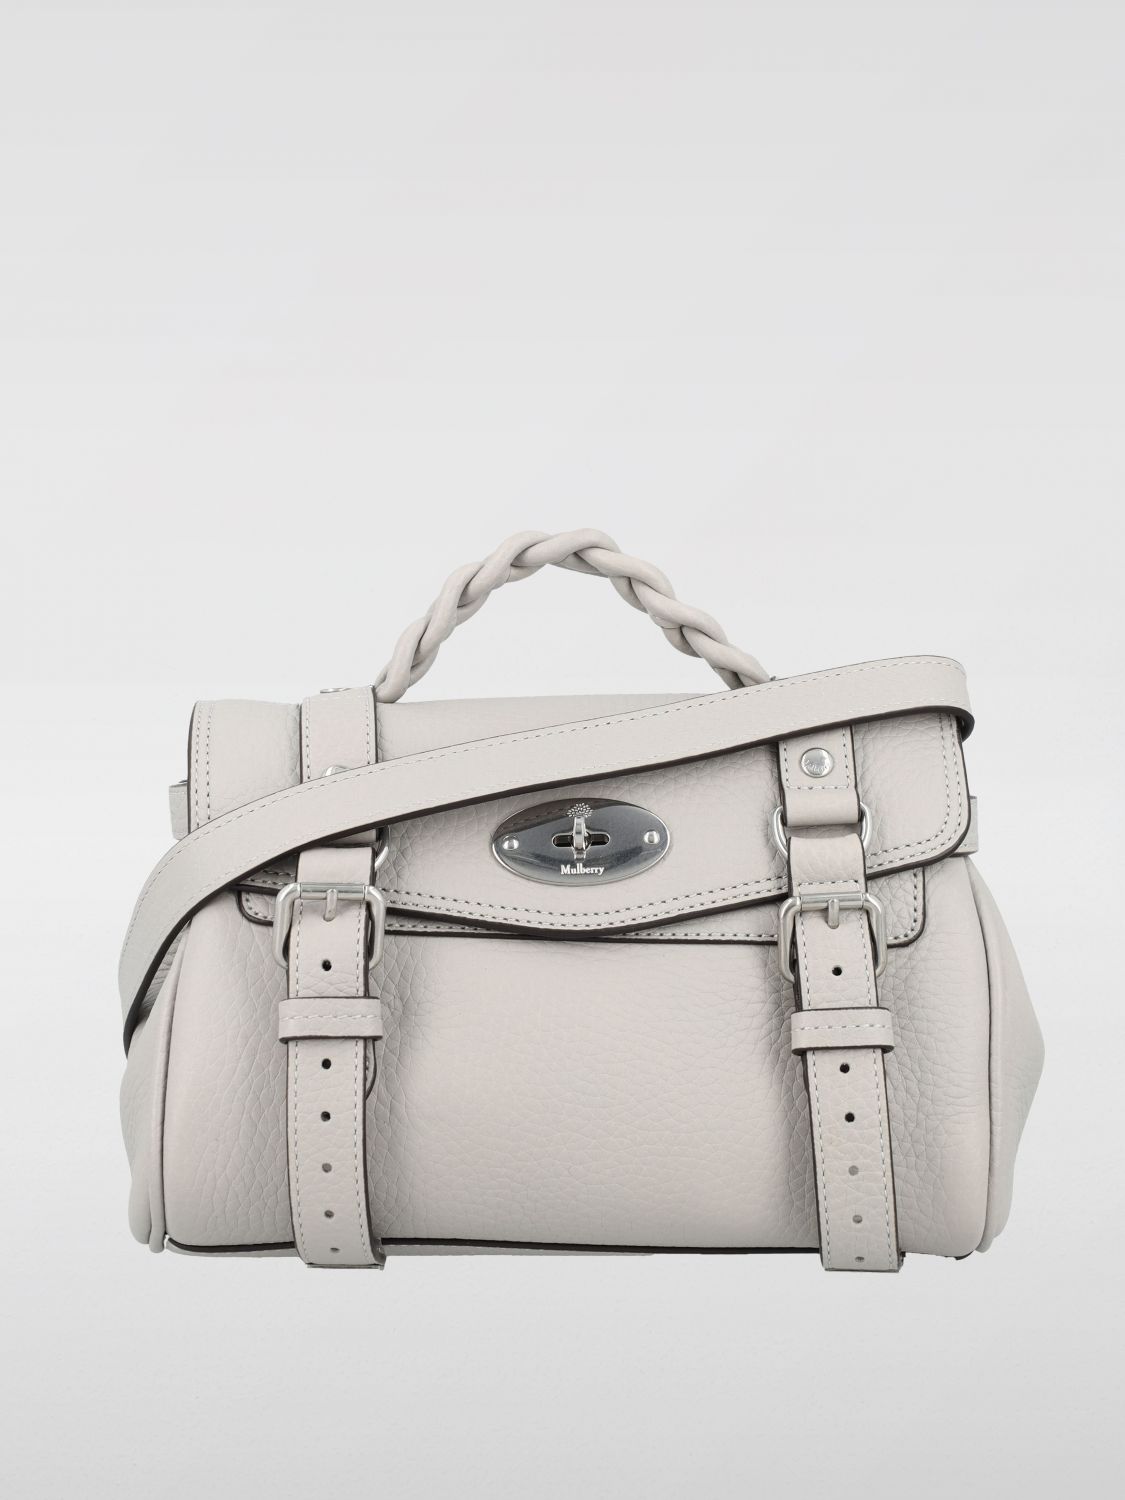 Mulberry Mulberry Alexa bag in grained leather